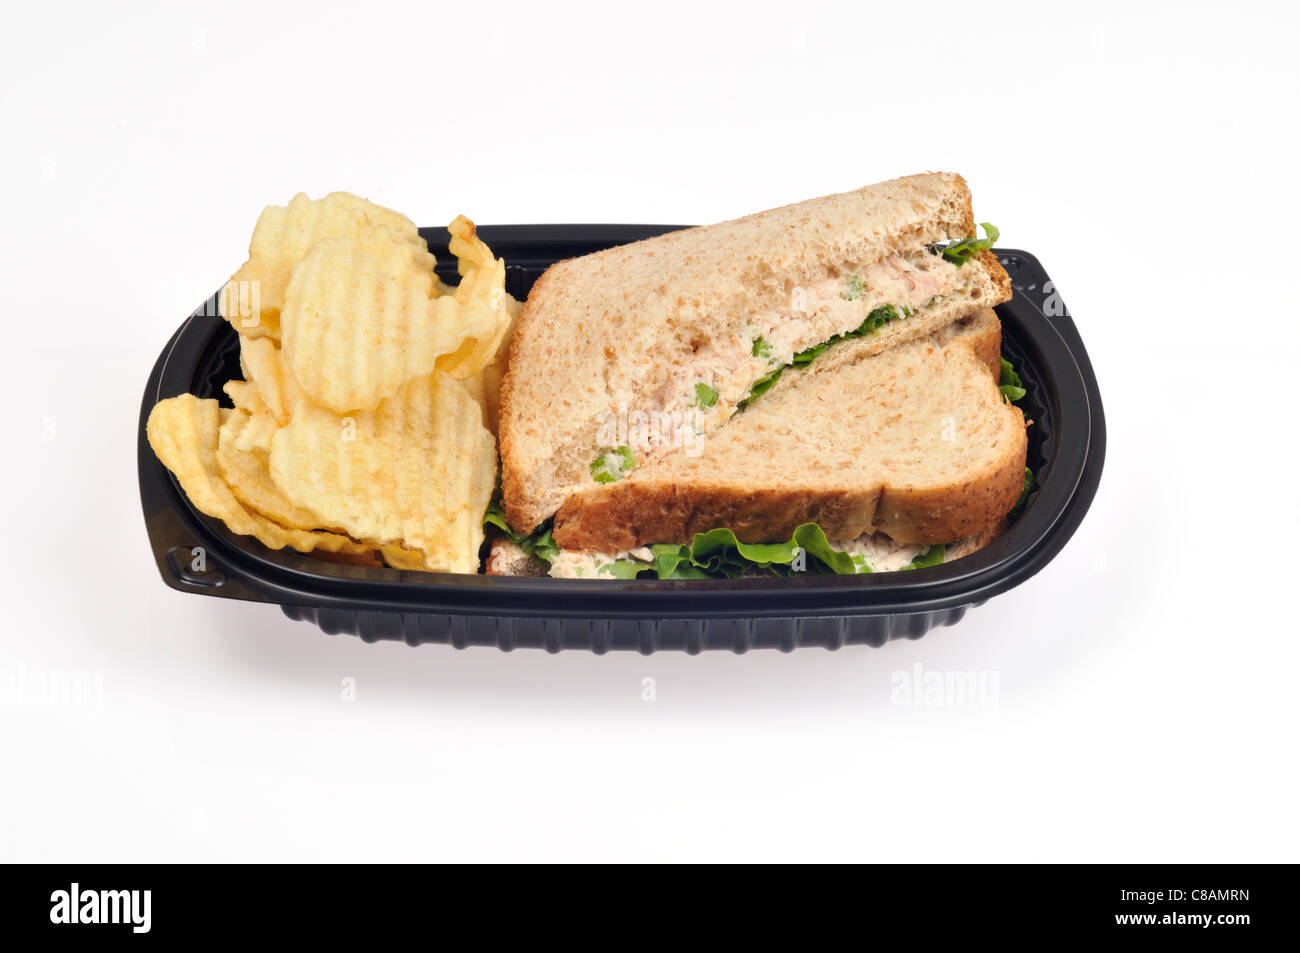 Tuna mayo sandwich with celery & lettuce on wholemeal bread cut in half w/ crisps or potato chips in a take away black plastic tray on white, cutout. Stock Photo